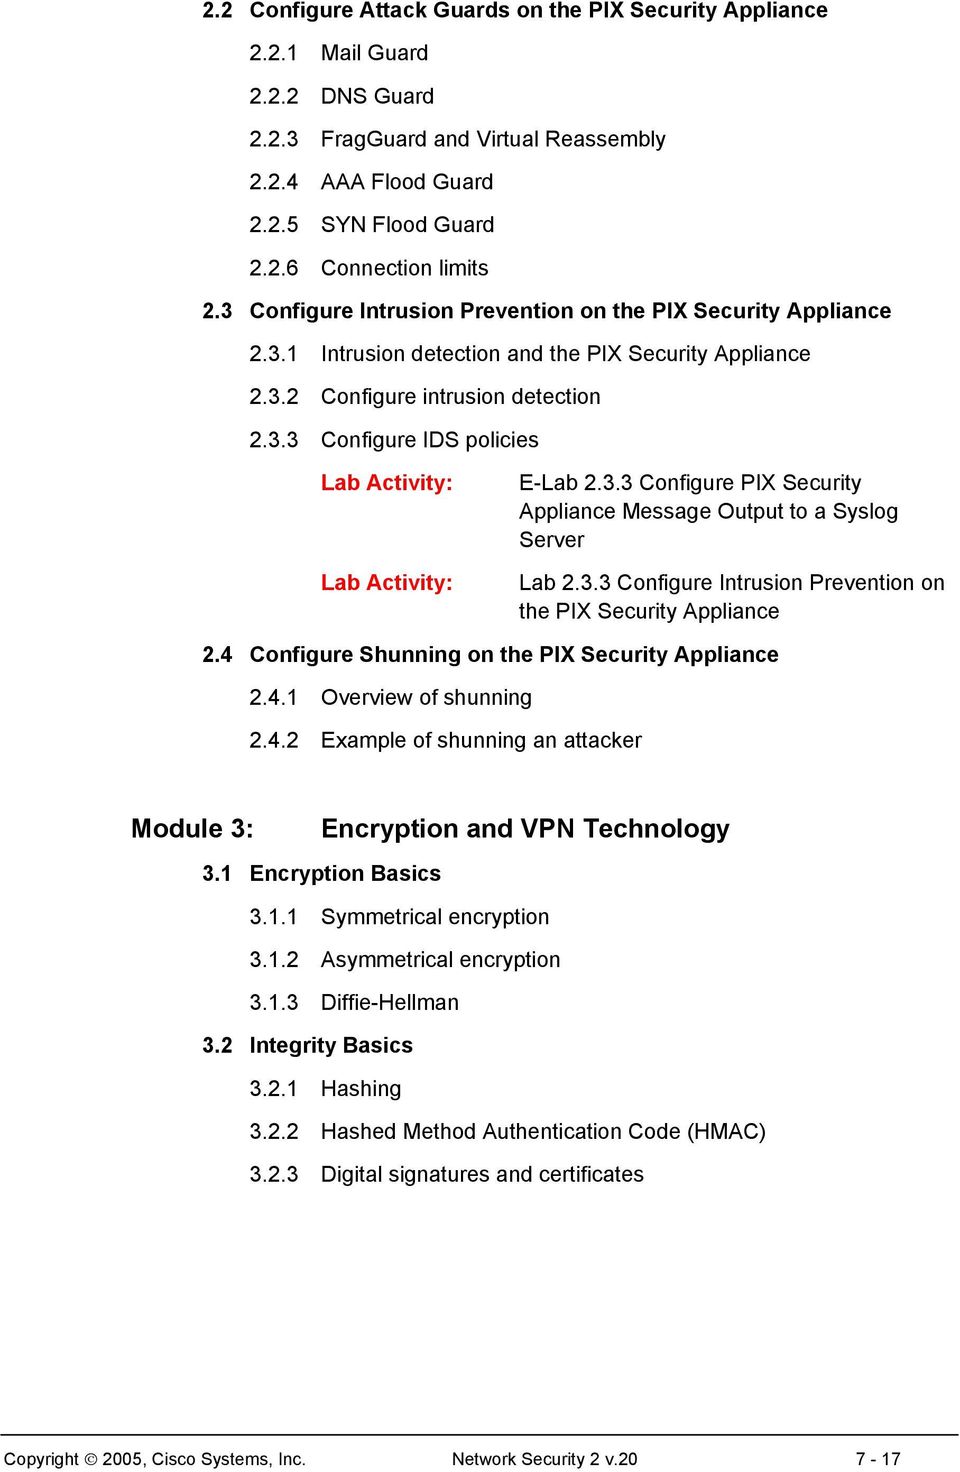 3.3 Configure Intrusion Prevention on the PIX Security Appliance 2.4 Configure Shunning on the PIX Security Appliance 2.4.1 Overview of shunning 2.4.2 Example of shunning an attacker Module 3: Encryption and VPN Technology 3.